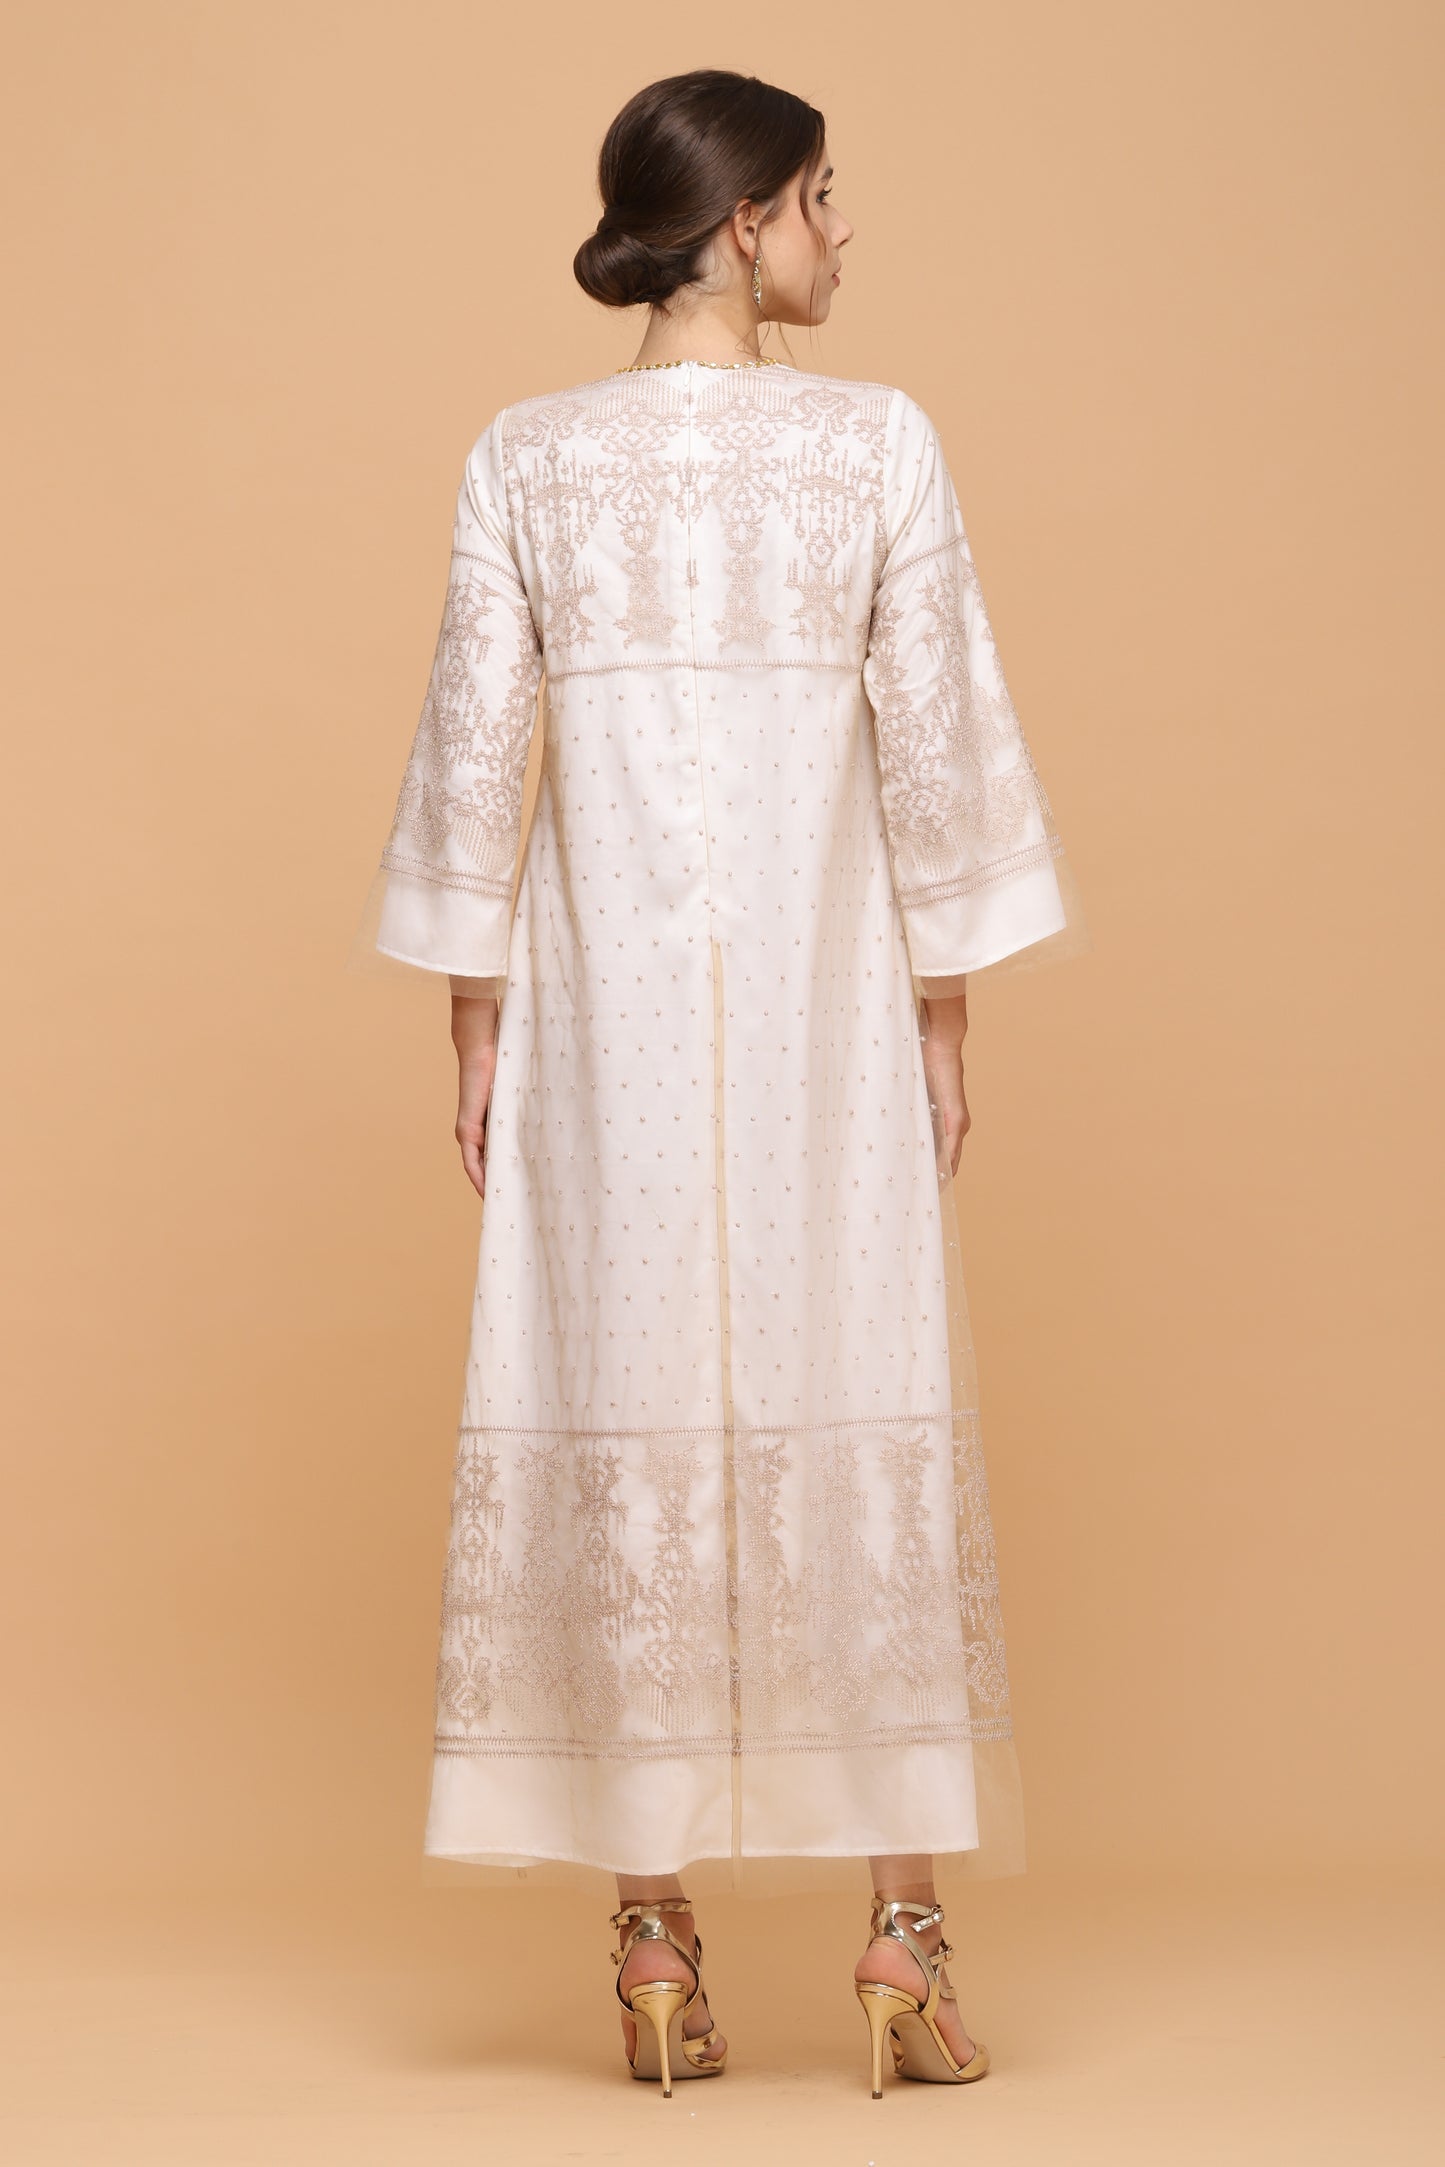 Kindness - Gold Lace on White Maxi Dress